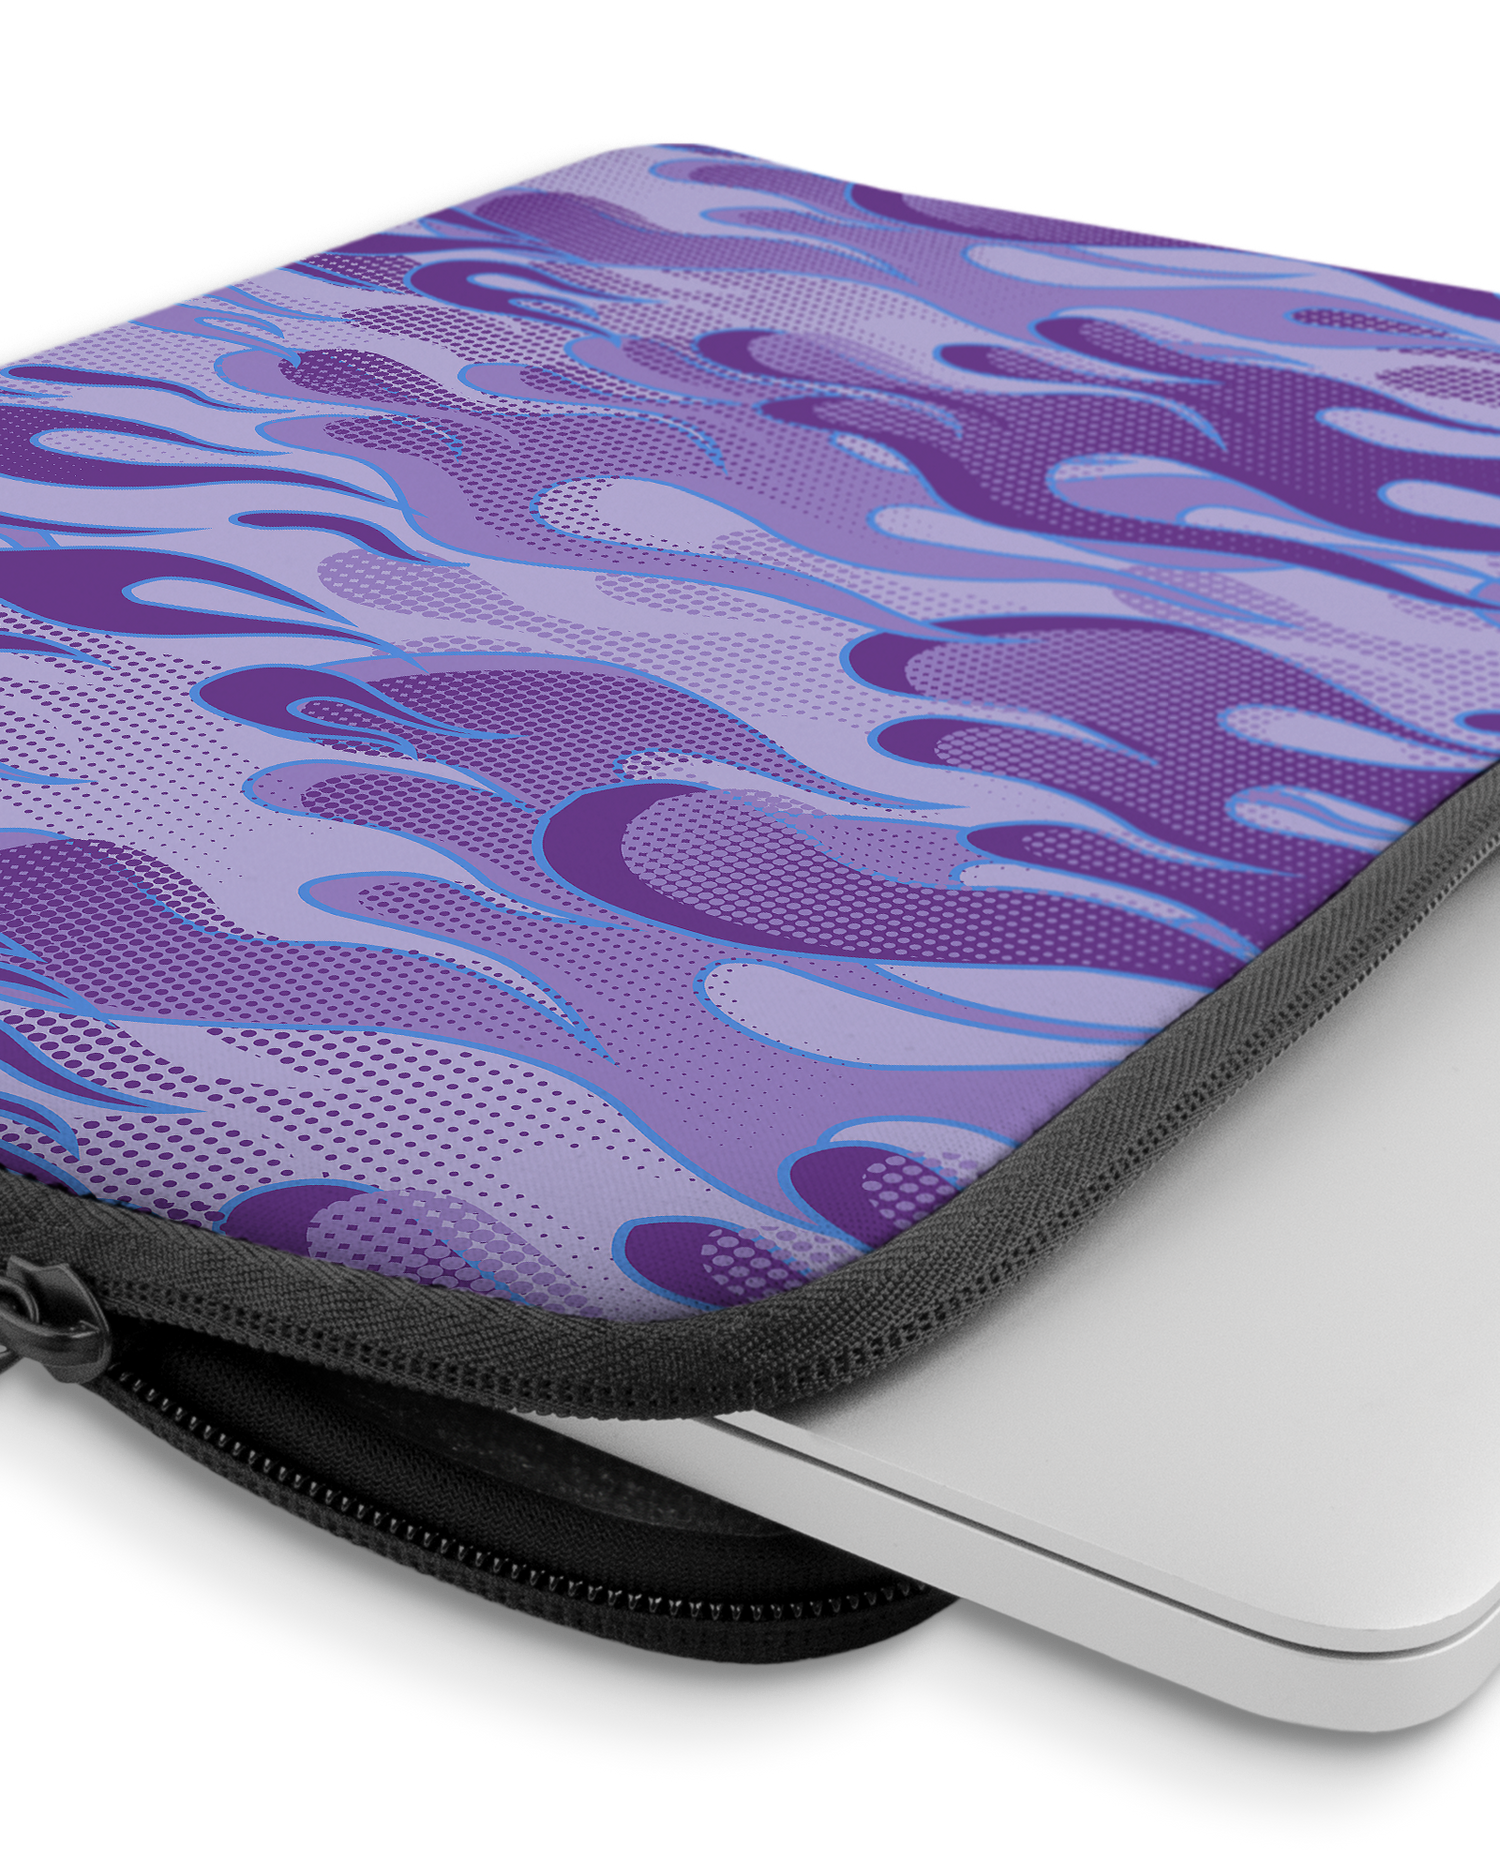 Purple Flames Laptop Case 13-14 inch with device inside